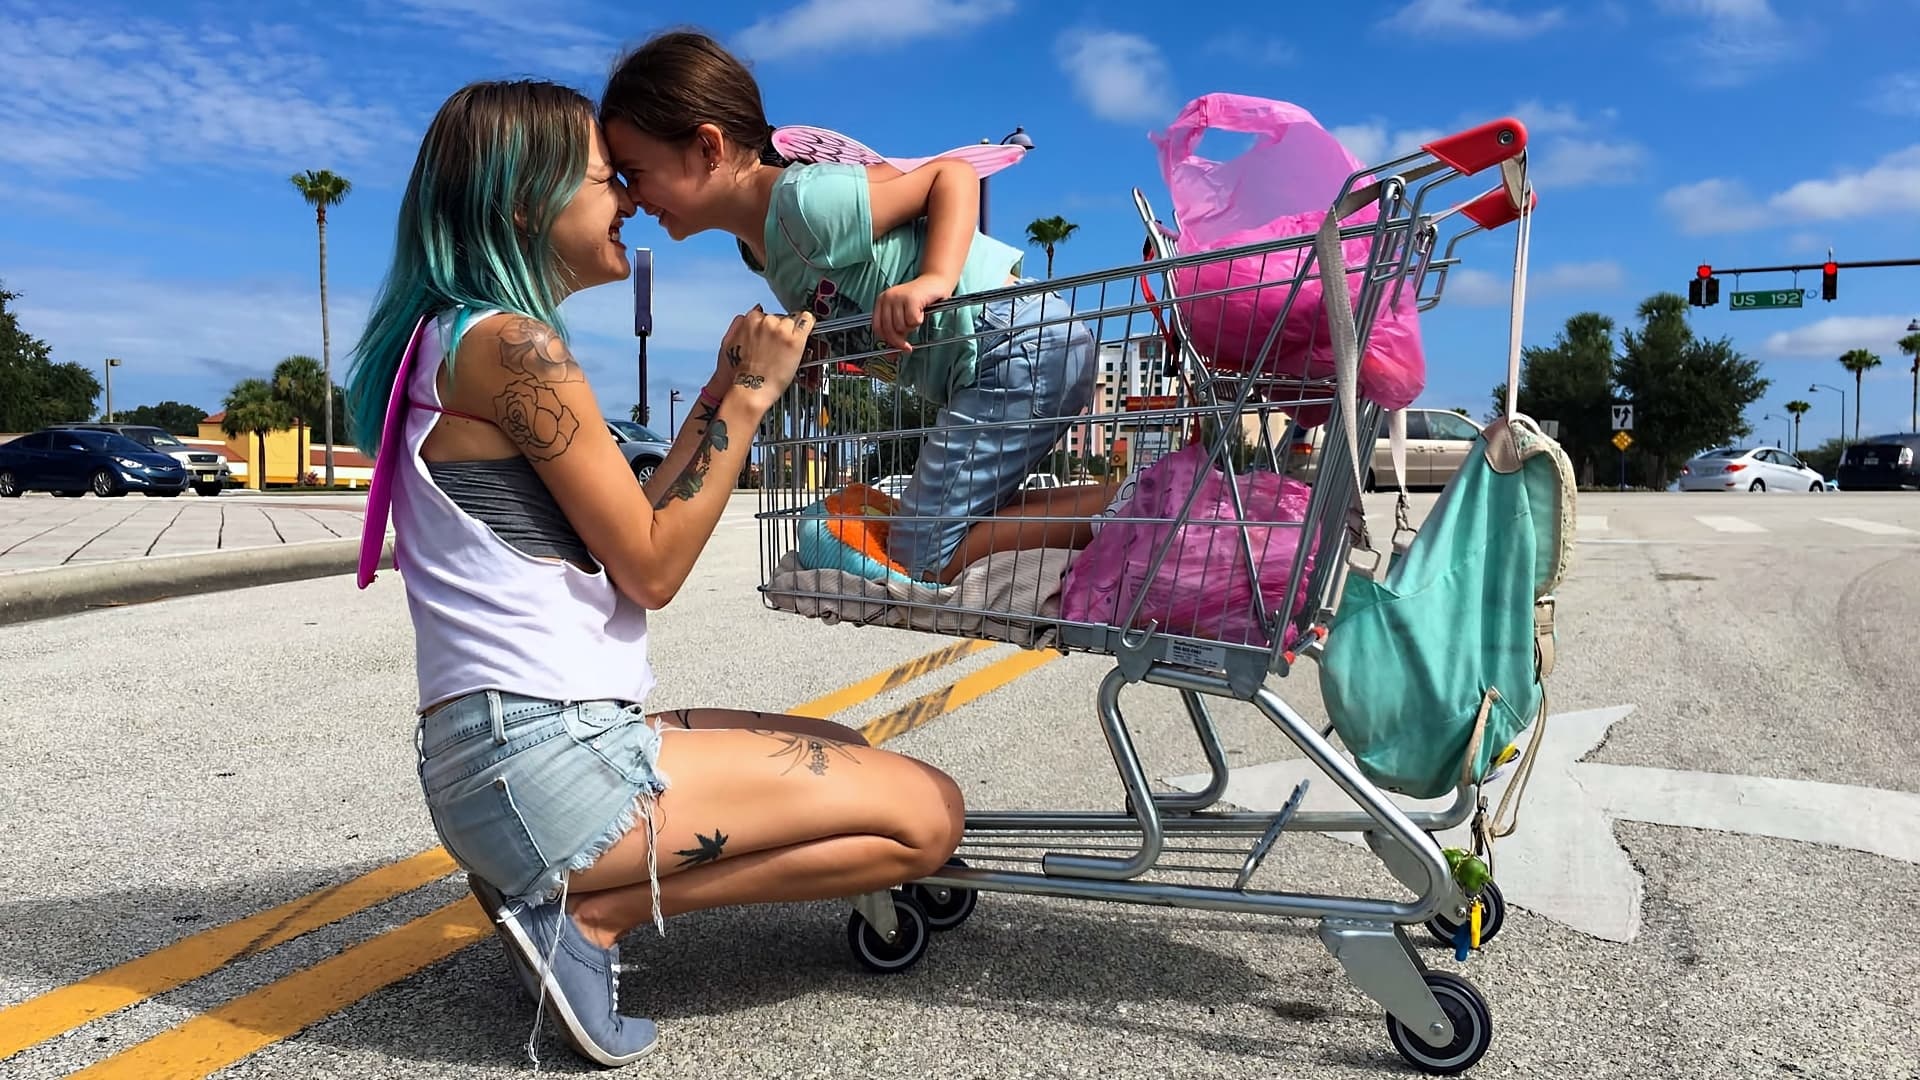 The Florida Project, Independent film, Atmospheric backdrops, Character-driven, 1920x1080 Full HD Desktop